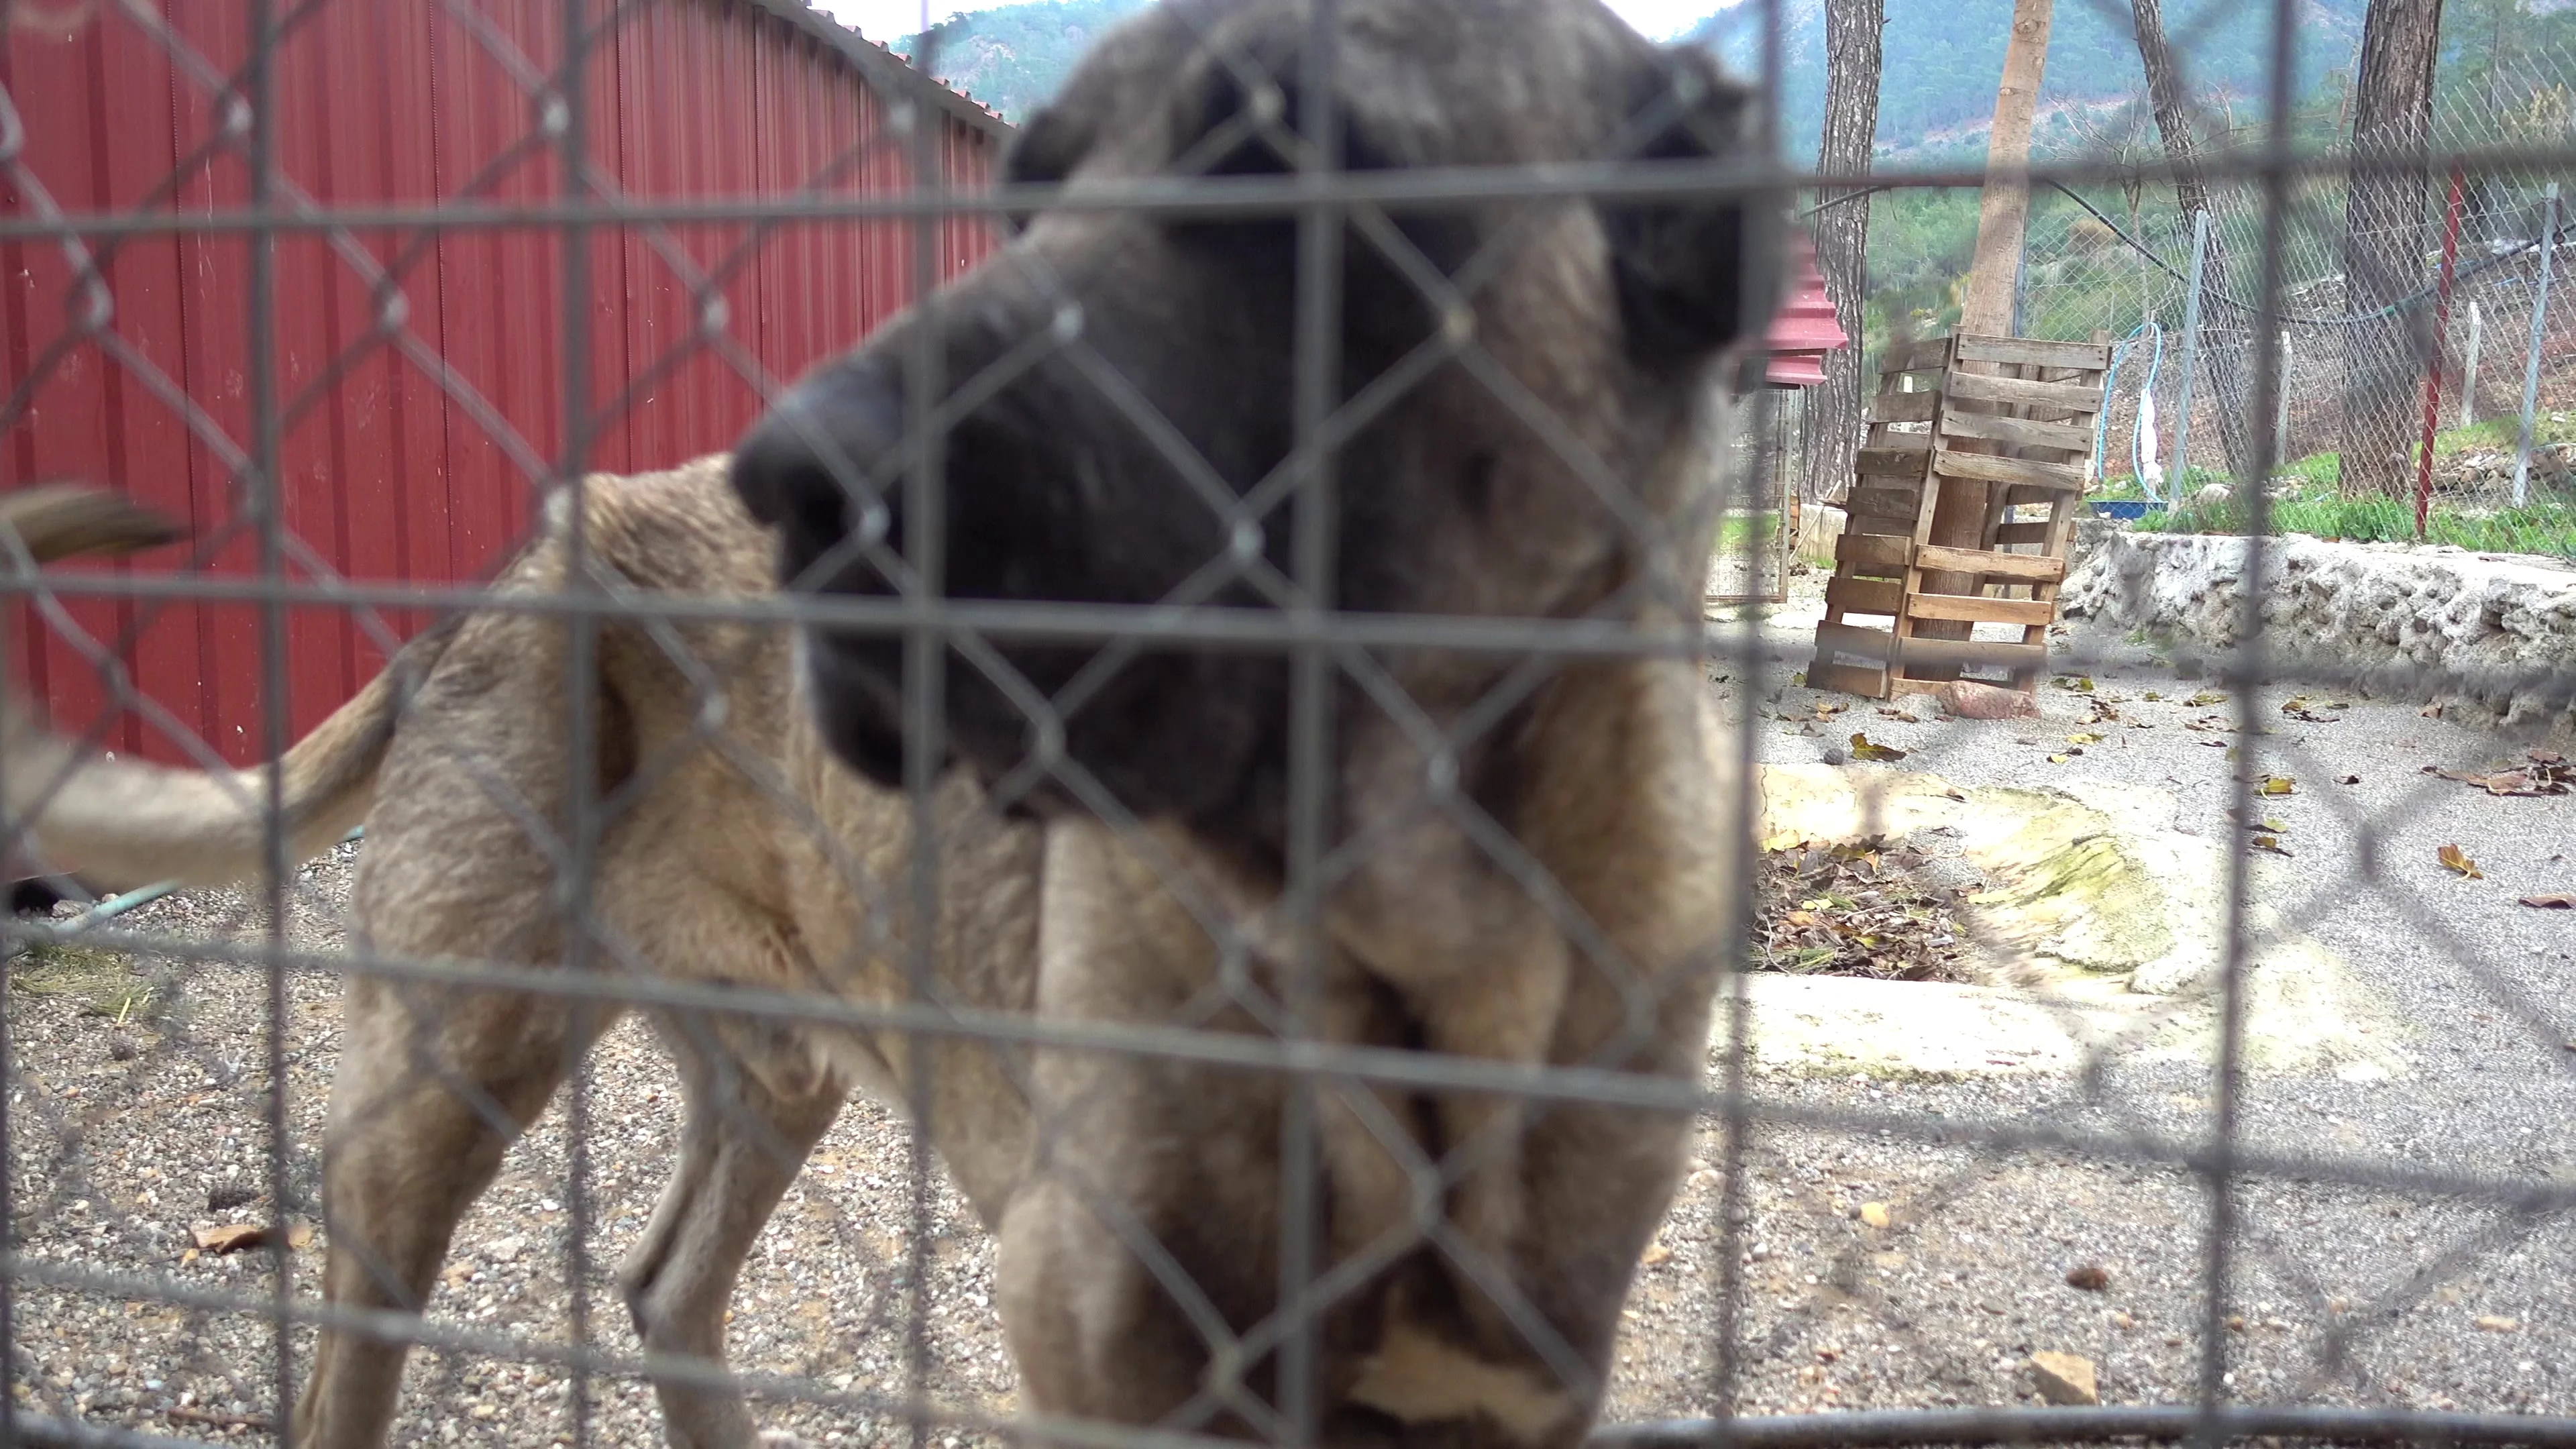 Skinny kangal dog in pen at the shelter | Stock Video | Pond5